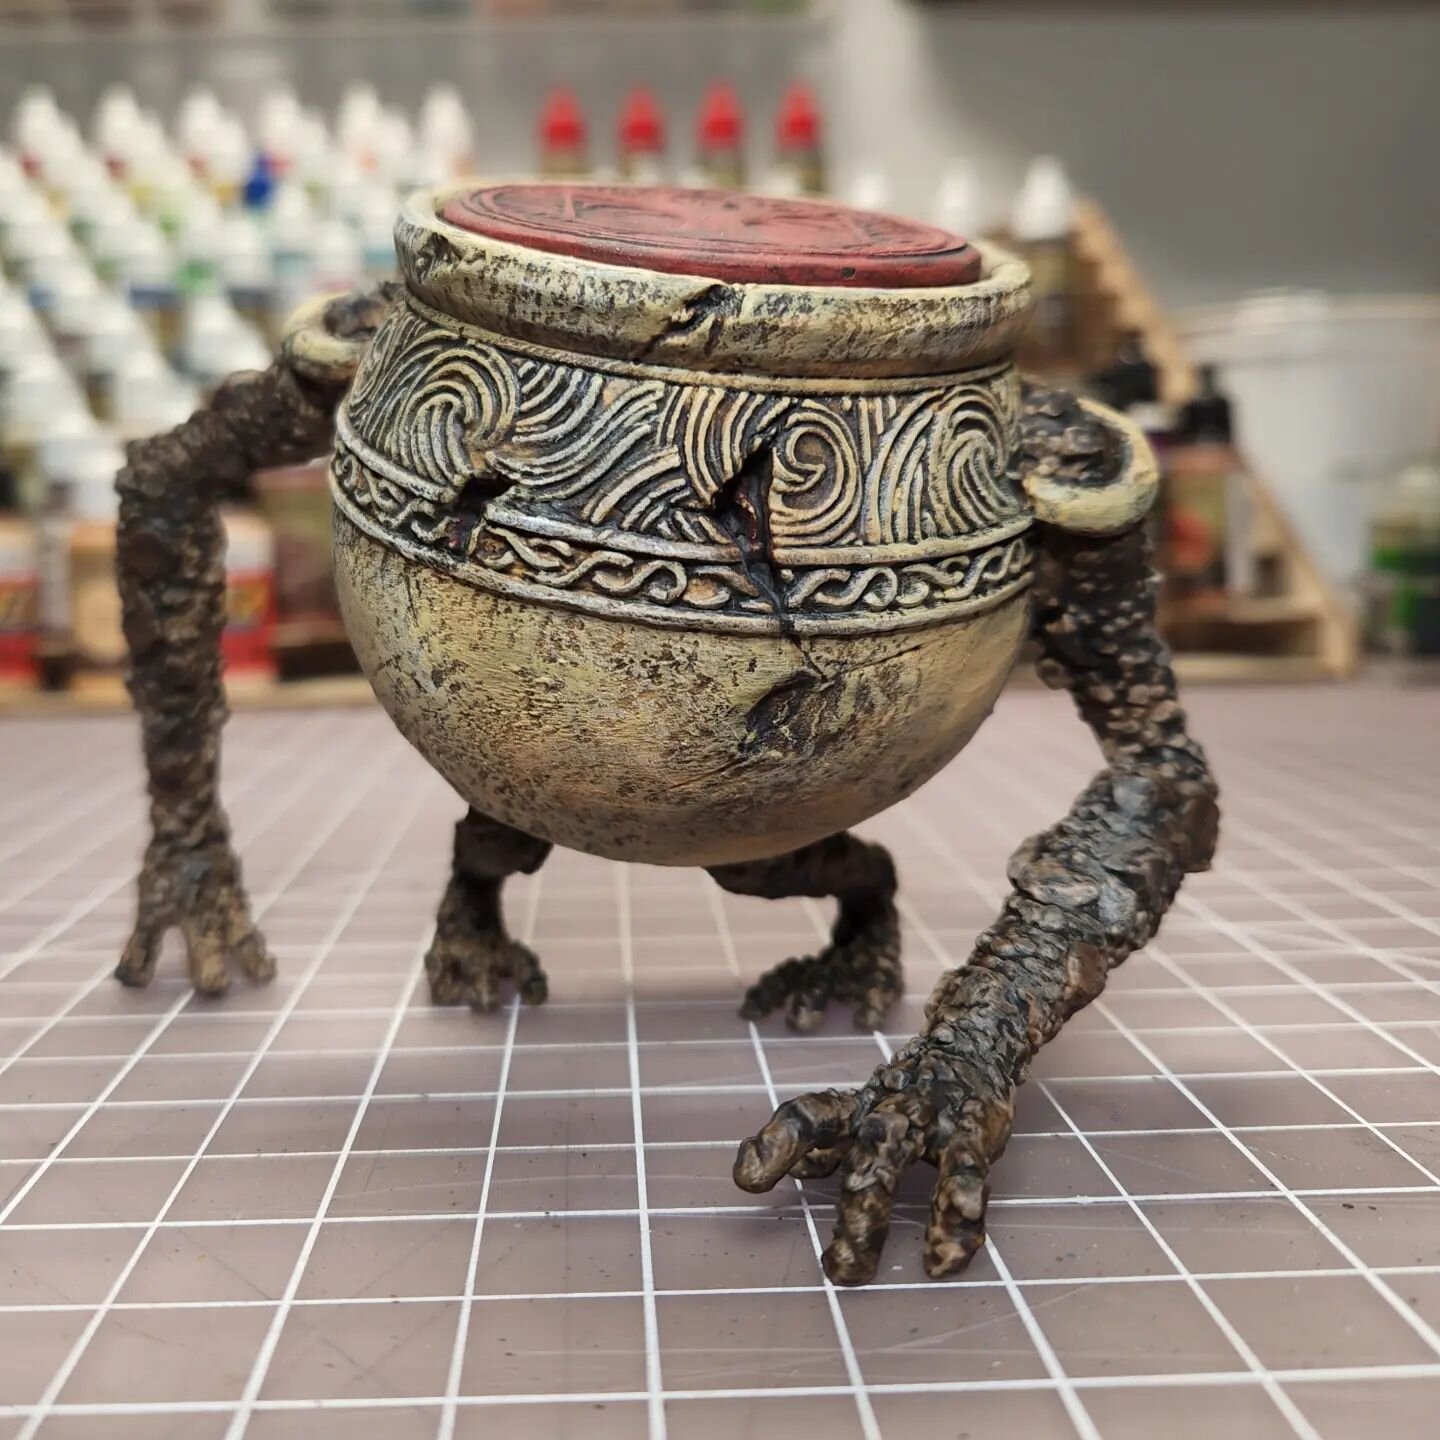 Haven't been printing or painting much, a big reason for that was the release of Elden Ring. Boy'o'boy... It probably is one of, if not my favorite game I've played. 

One of my favorite character is Alexander the Warrior Jar, so when I saw this mode